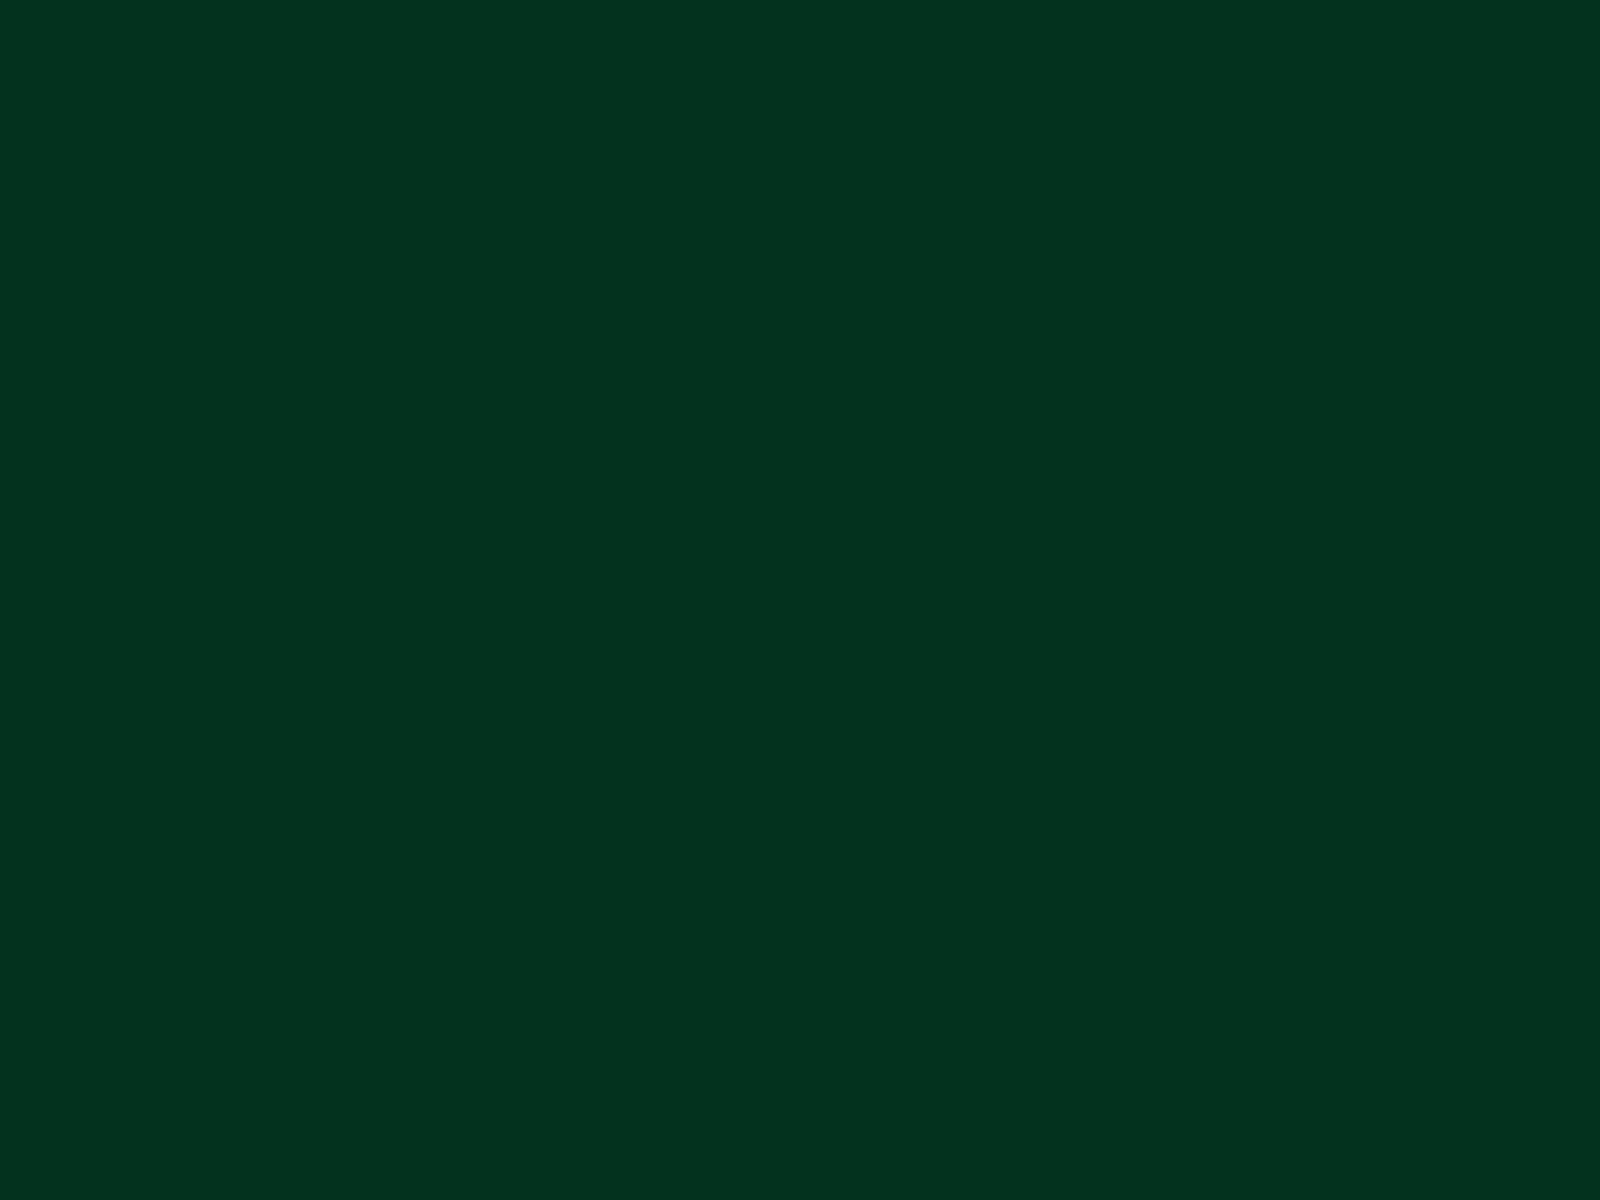 Dark Green 1600X1200 Wallpaper and Background Image